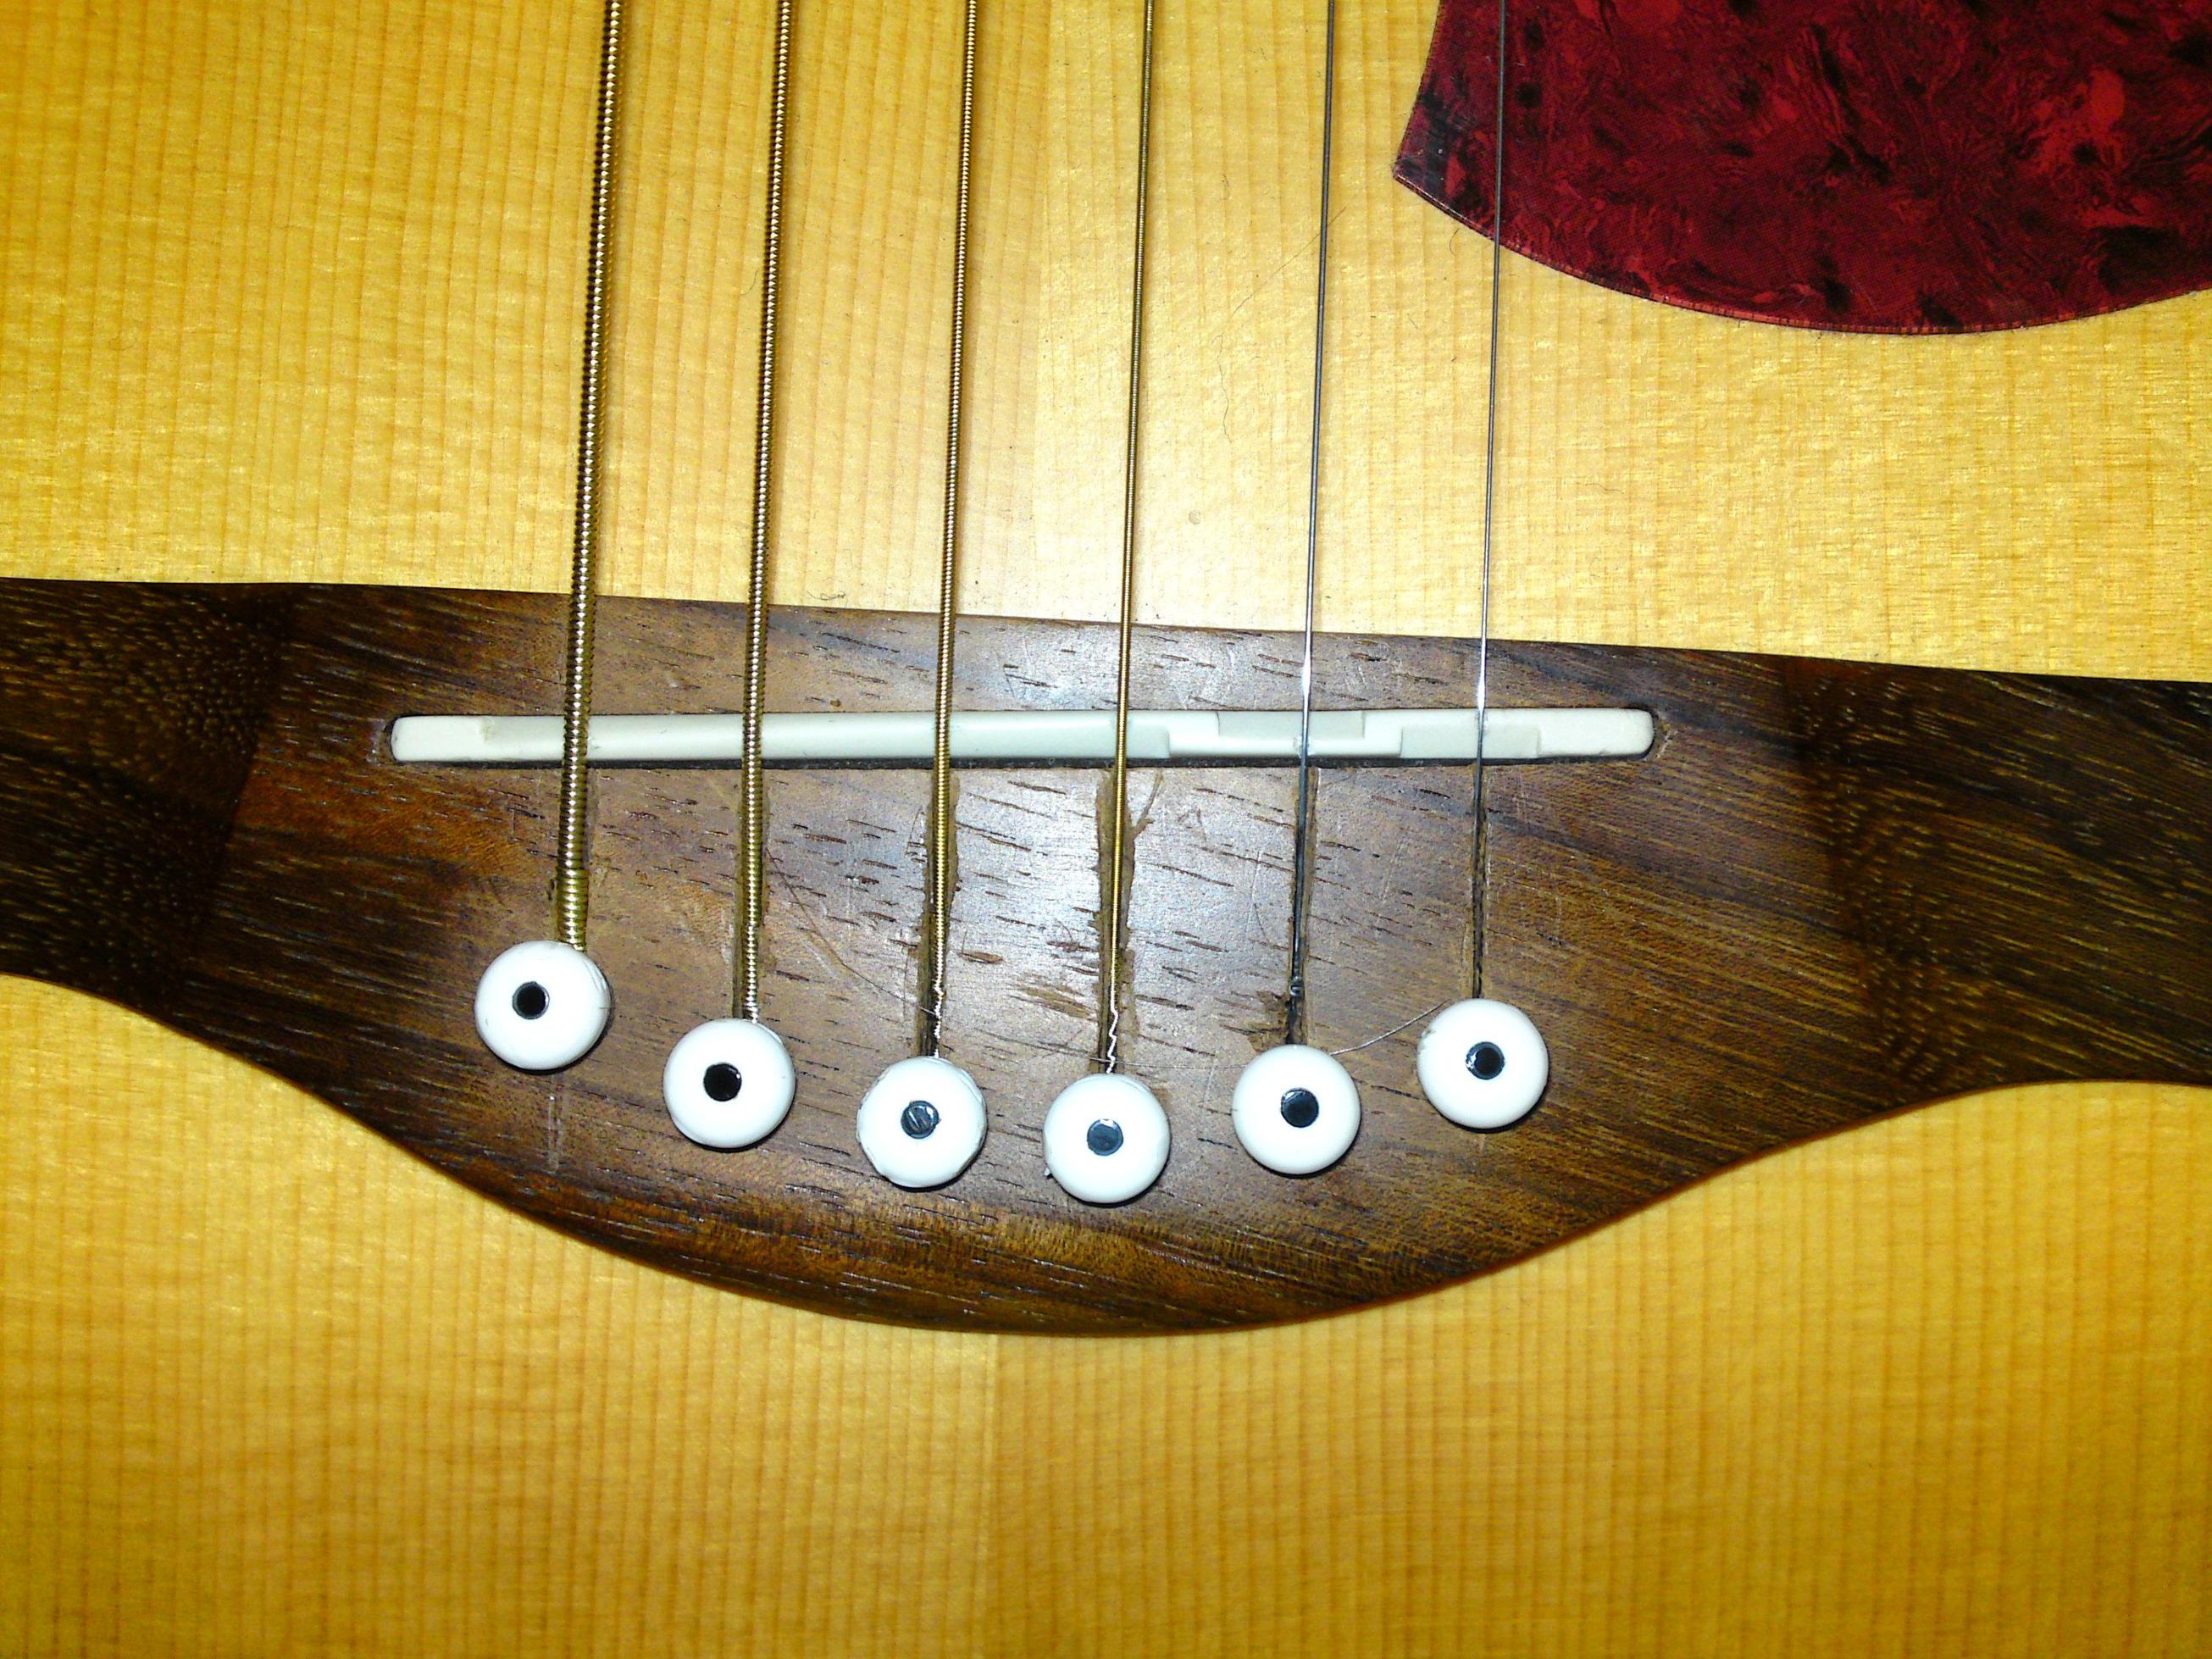 tuning - Why is my guitar's saddle at an angle? - Music: Practice ...